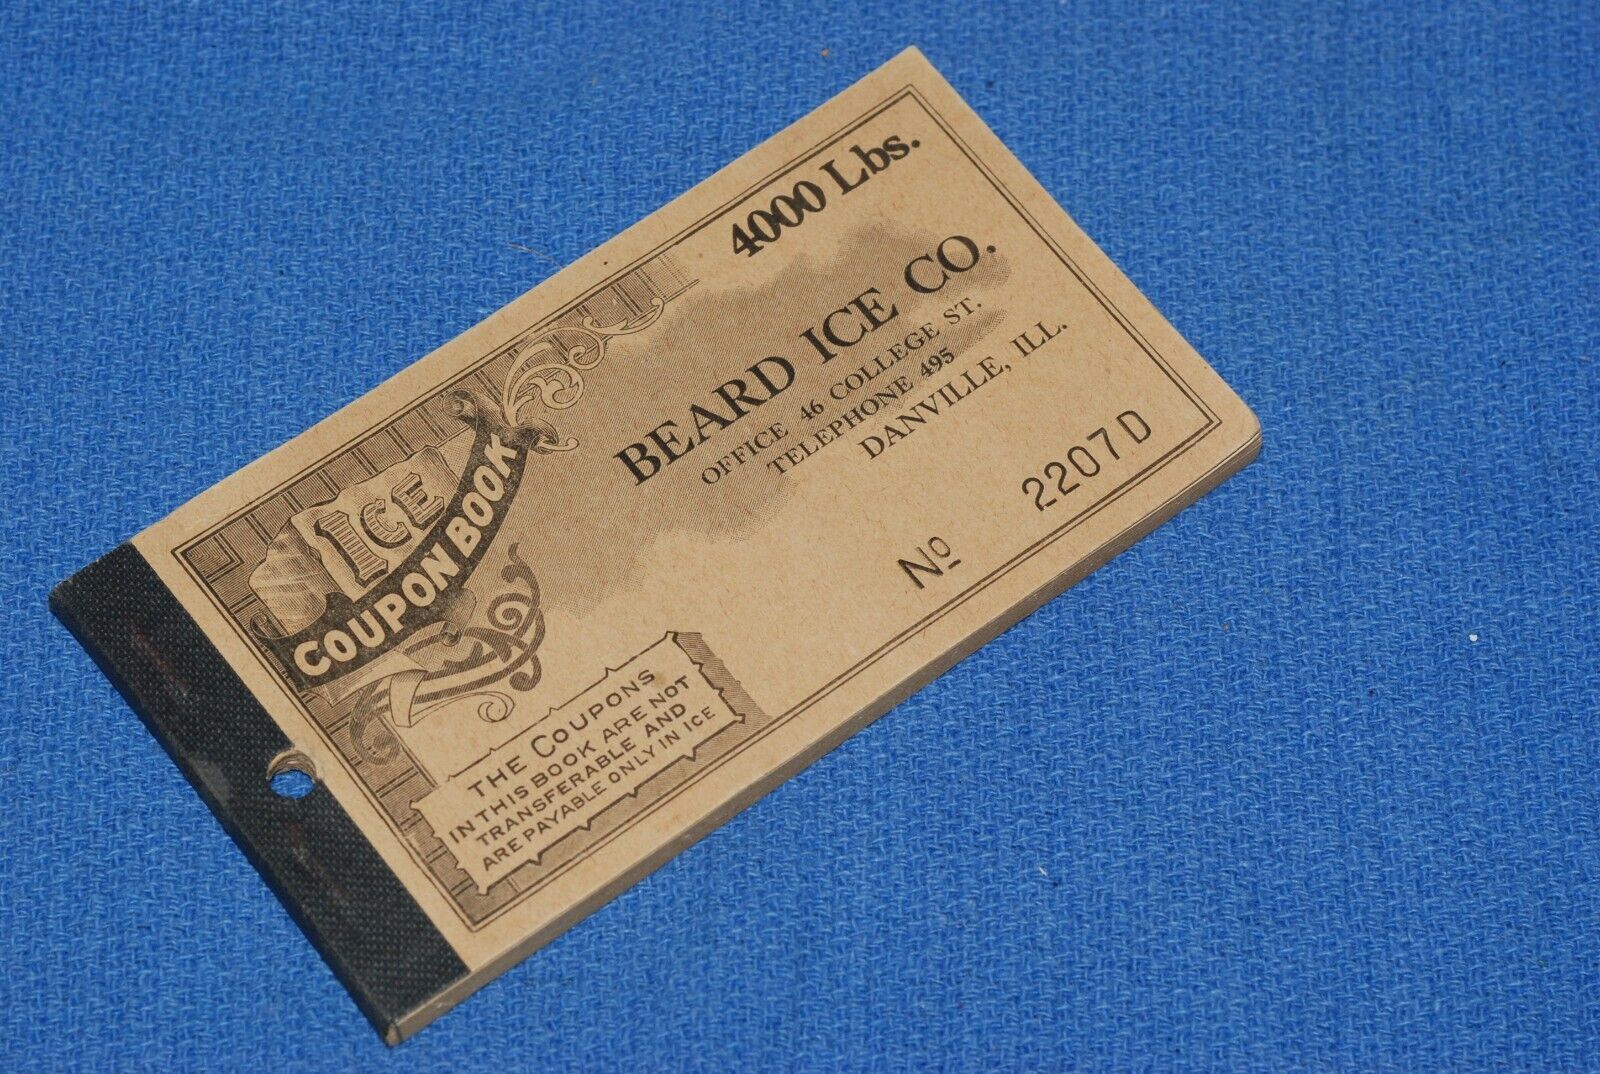 Beard Ice Company Ice Coupon Book Danville, IL BlueLakeStamps NICE